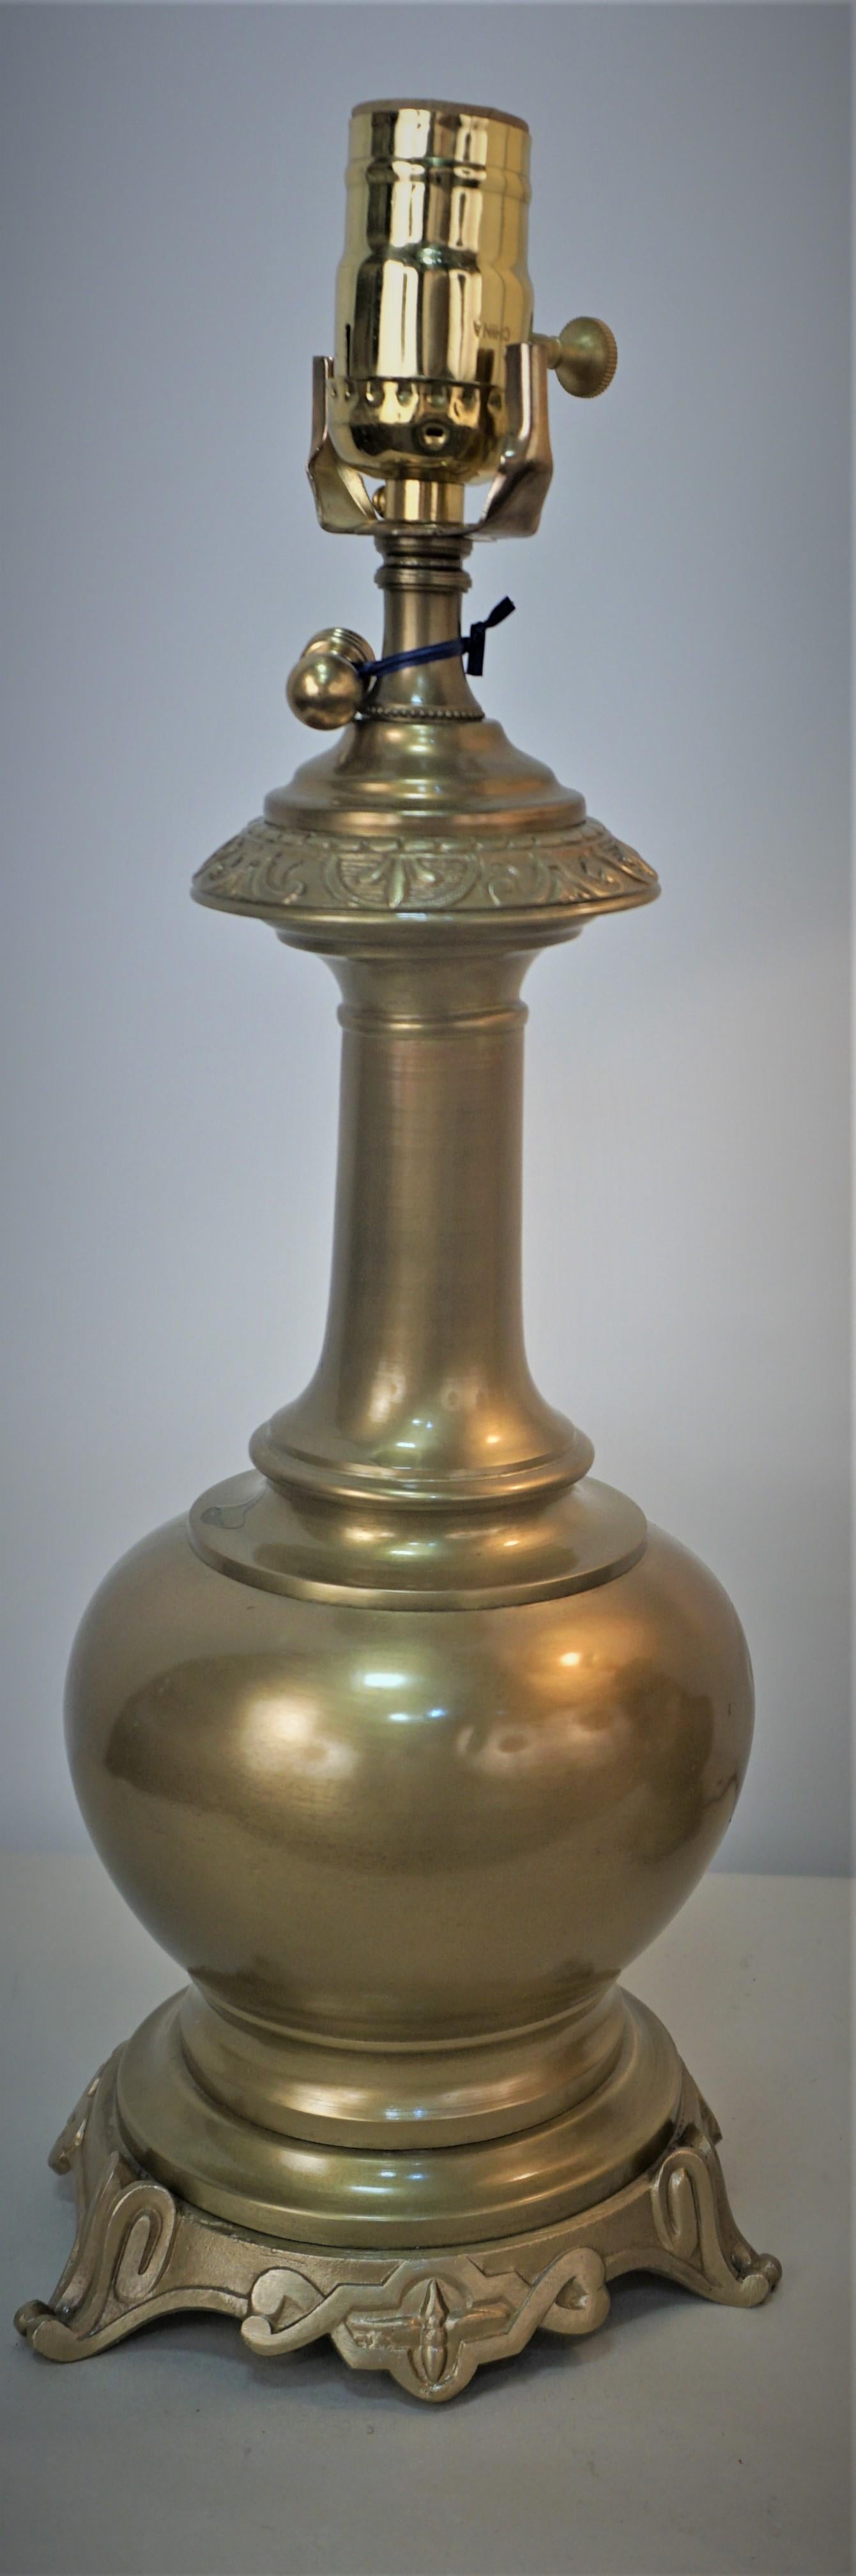 Pair of 19th century bronze table lamps that have been professionally electrified and fitted with silk lampshades.